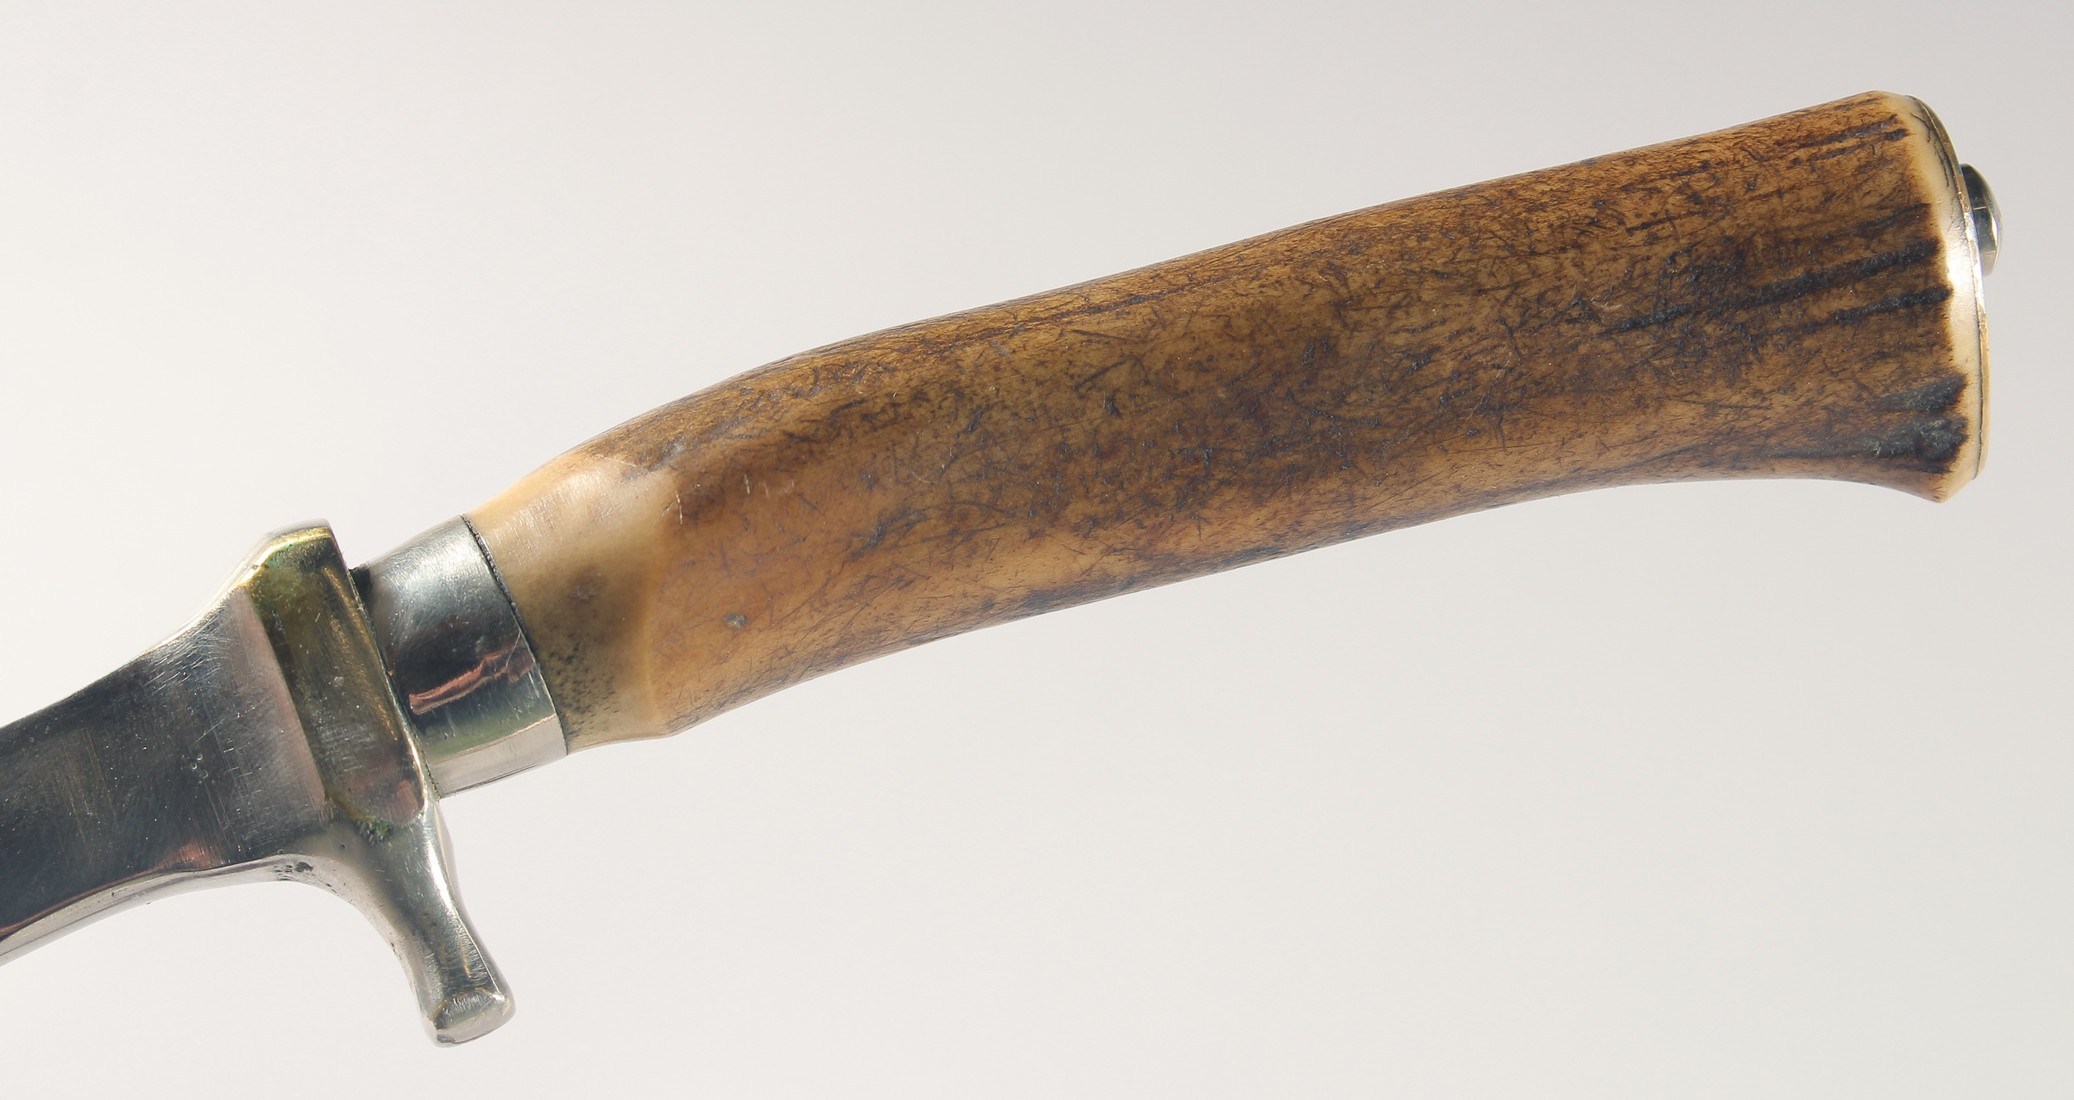 A HENEJU KNIFE, with an antler handle, 13" long, with a leather sheath. - Image 3 of 4